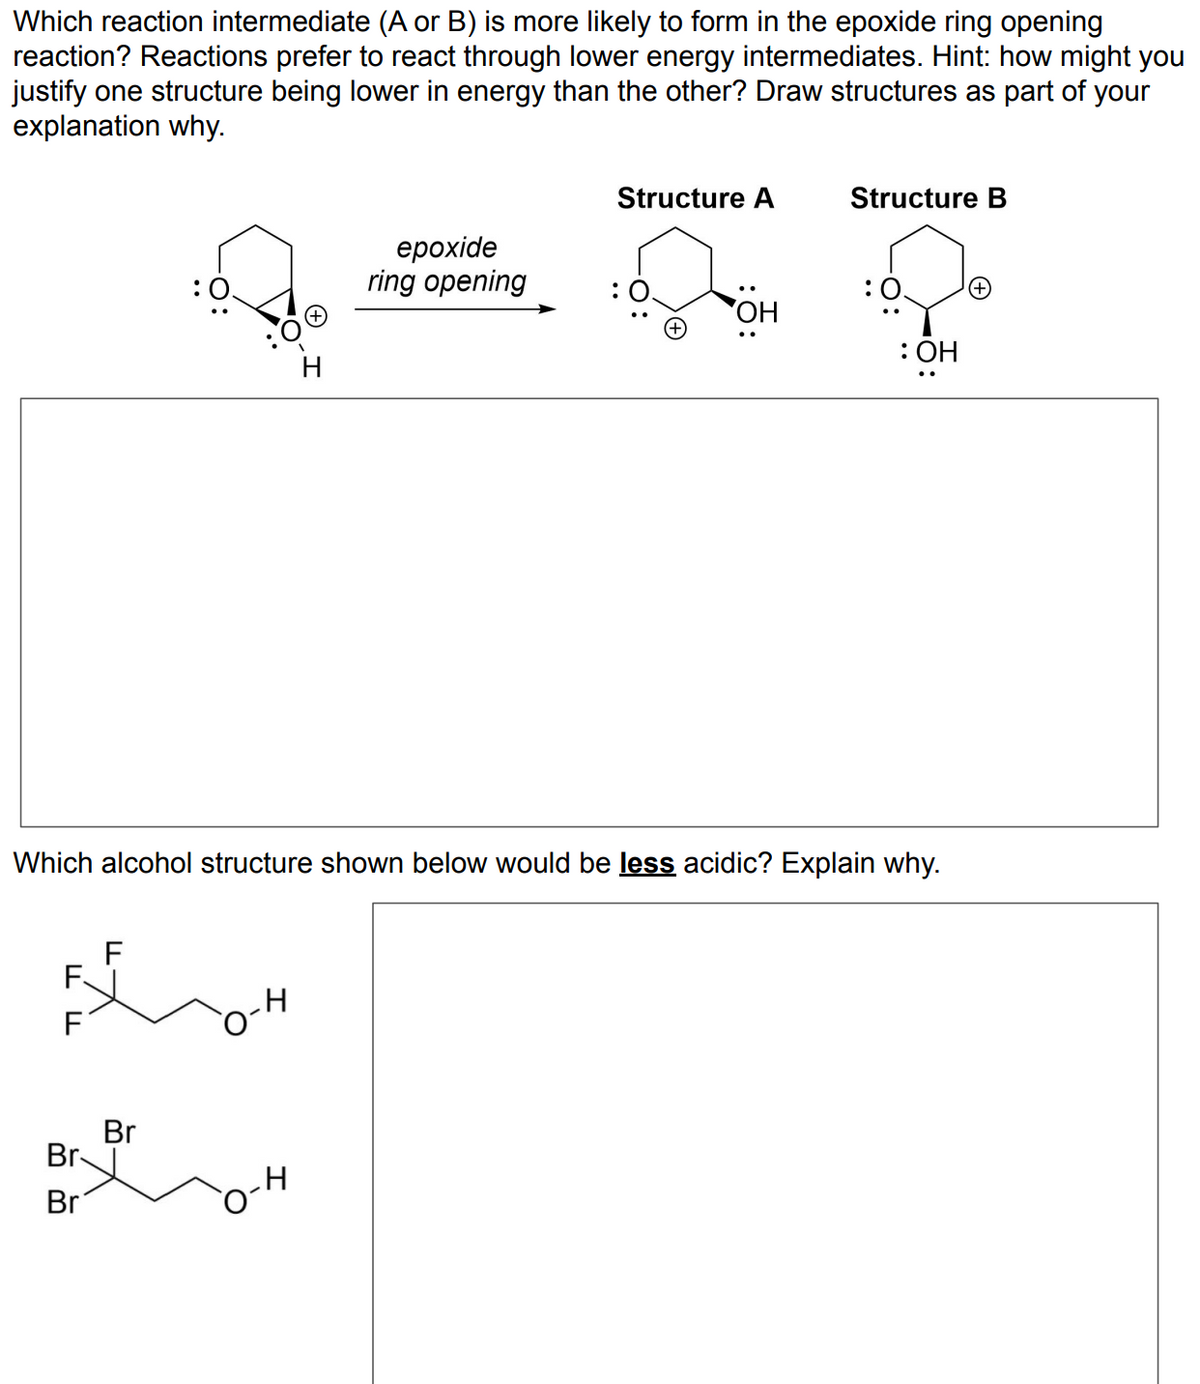 Which reaction intermediate (A or B) is more likely to form in the epoxide ring opening
reaction? Reactions prefer to react through lower energy intermediates. Hint: how might you
justify one structure being lower in energy than the other? Draw structures as part of your
explanation why.
F
F.
BOH
F
:0.
Br
Br
Br
H
H
epoxide
ring opening
Structure A
Which alcohol structure shown below would be less acidic? Explain why.
OH
Structure B
: 0.
: OH